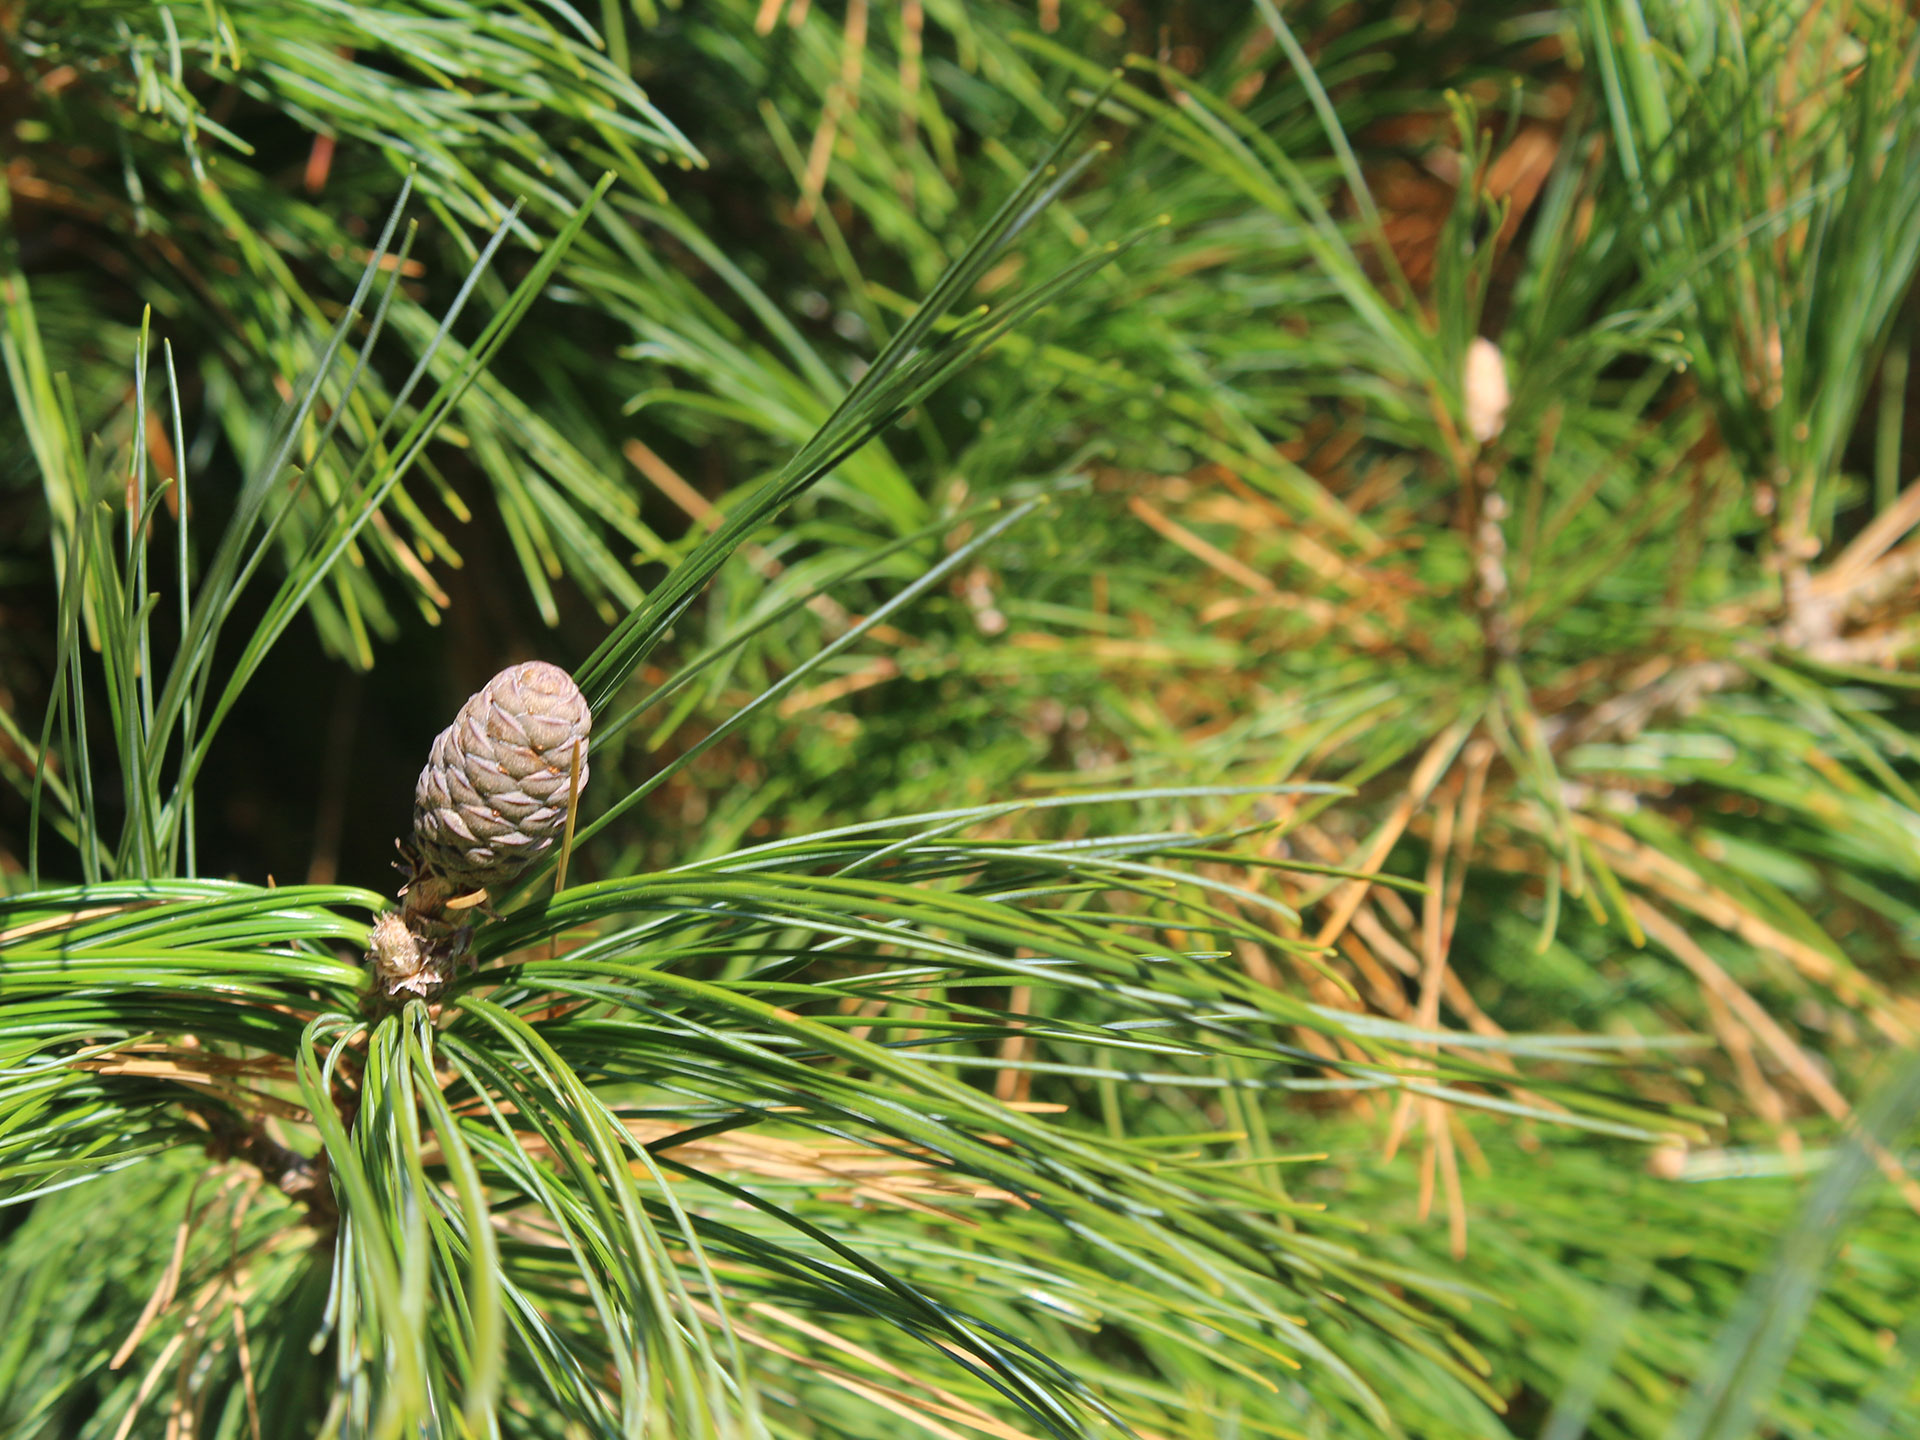 Rhora's offers many kinds of edible pines.